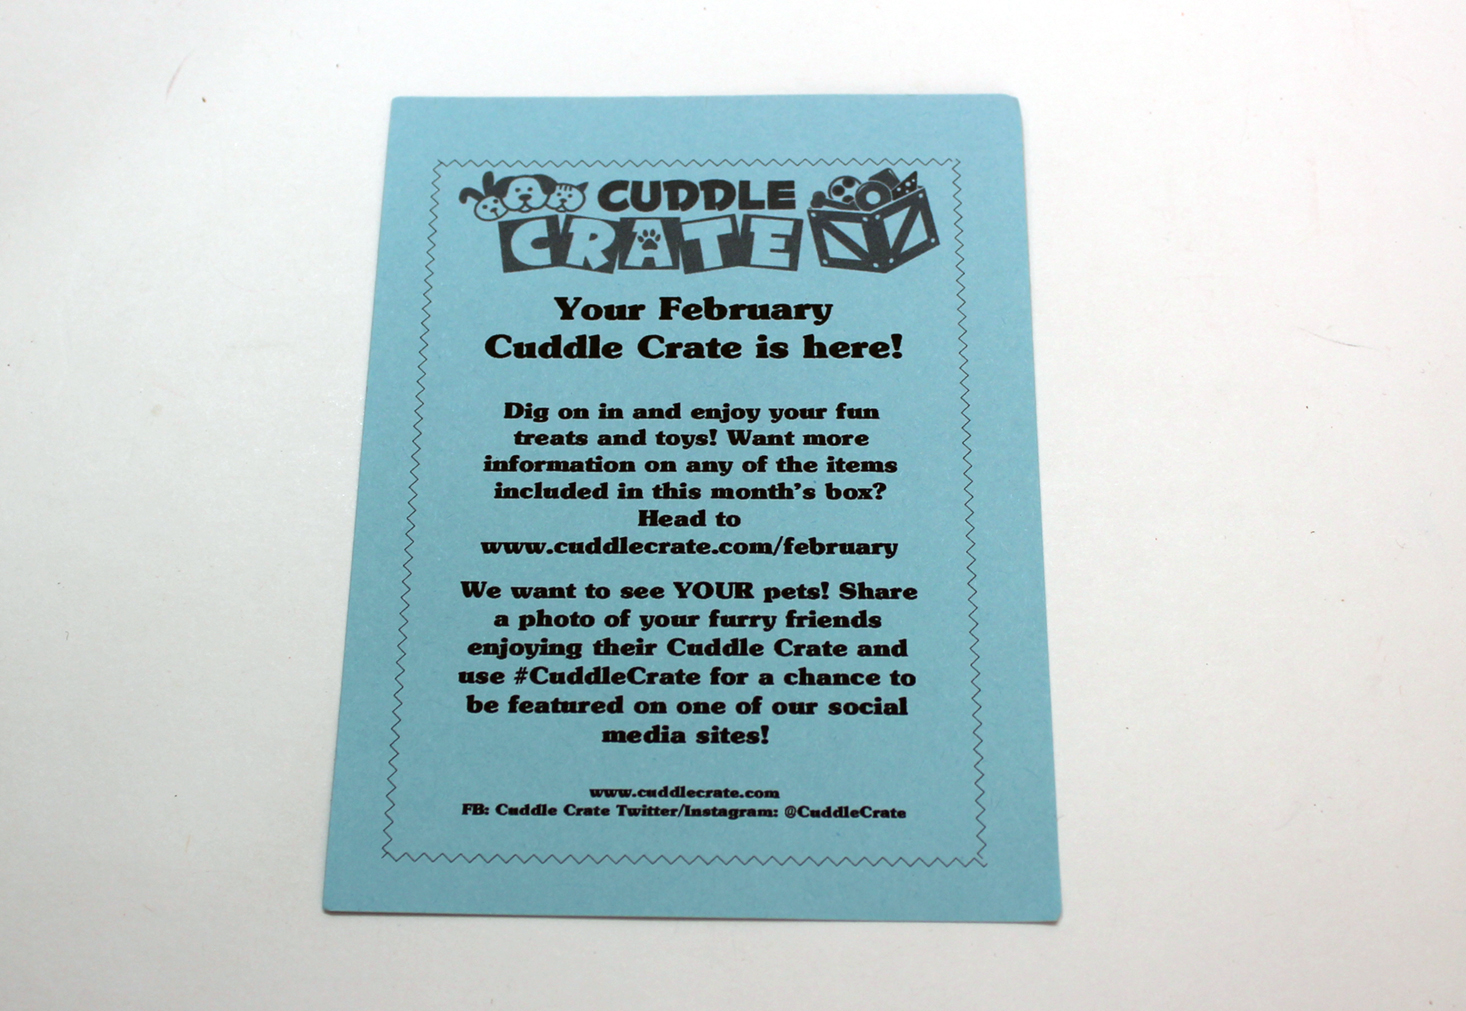 cuddle-crate-february-2017-booklet